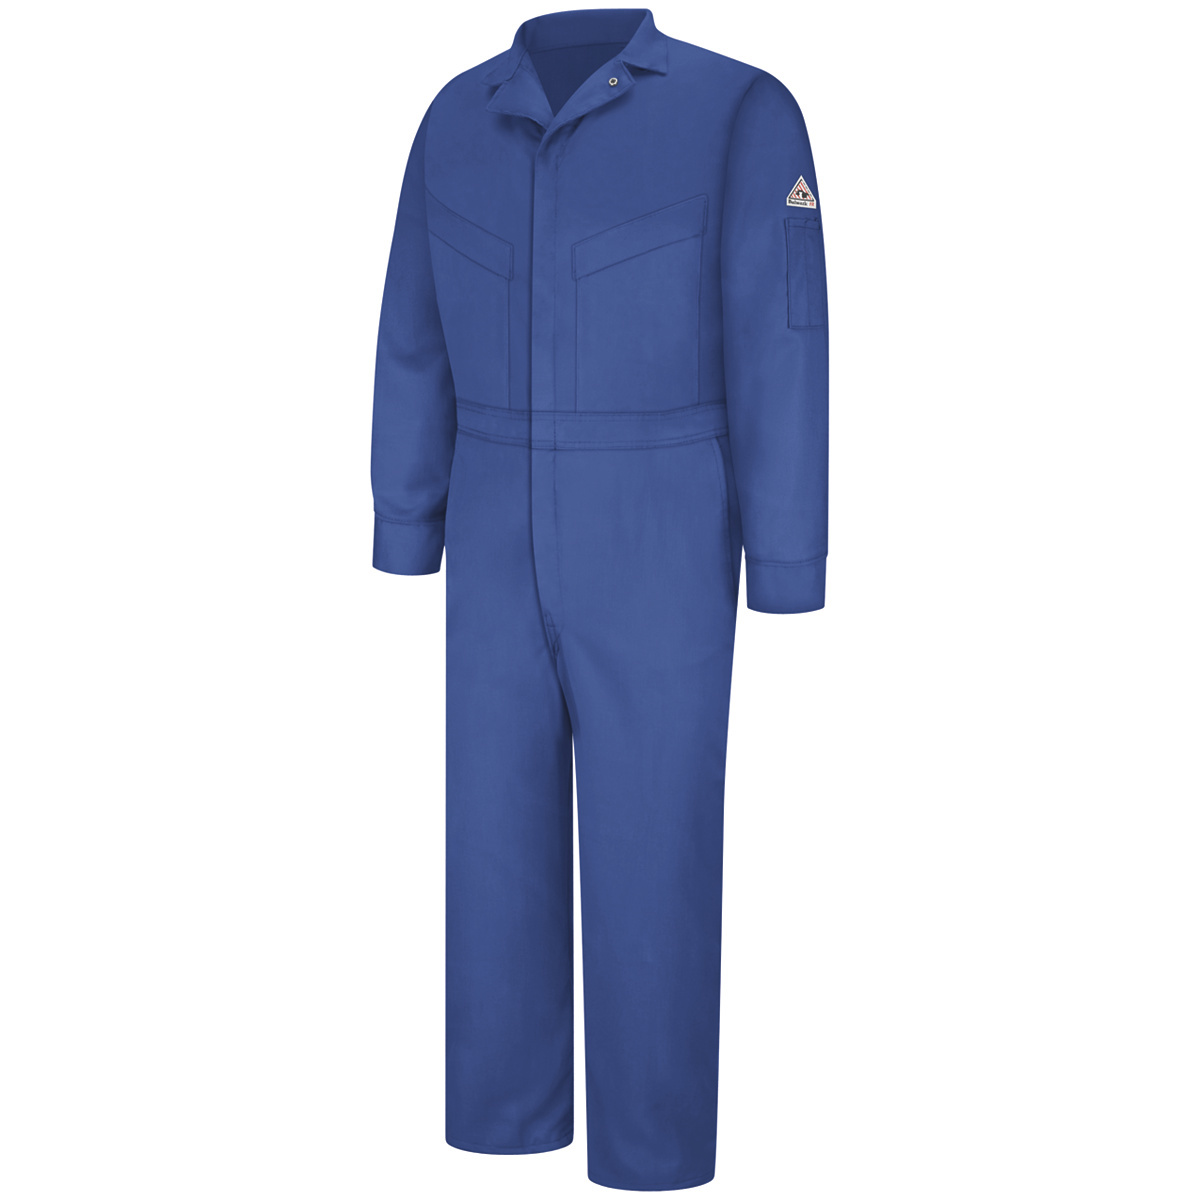 Bulwark® 42 Regular Royal Blue EXCEL FR® ComforTouch® Sateen/Cotton/Nylon Water Repellent Flame Resistant Coveralls With Zipper